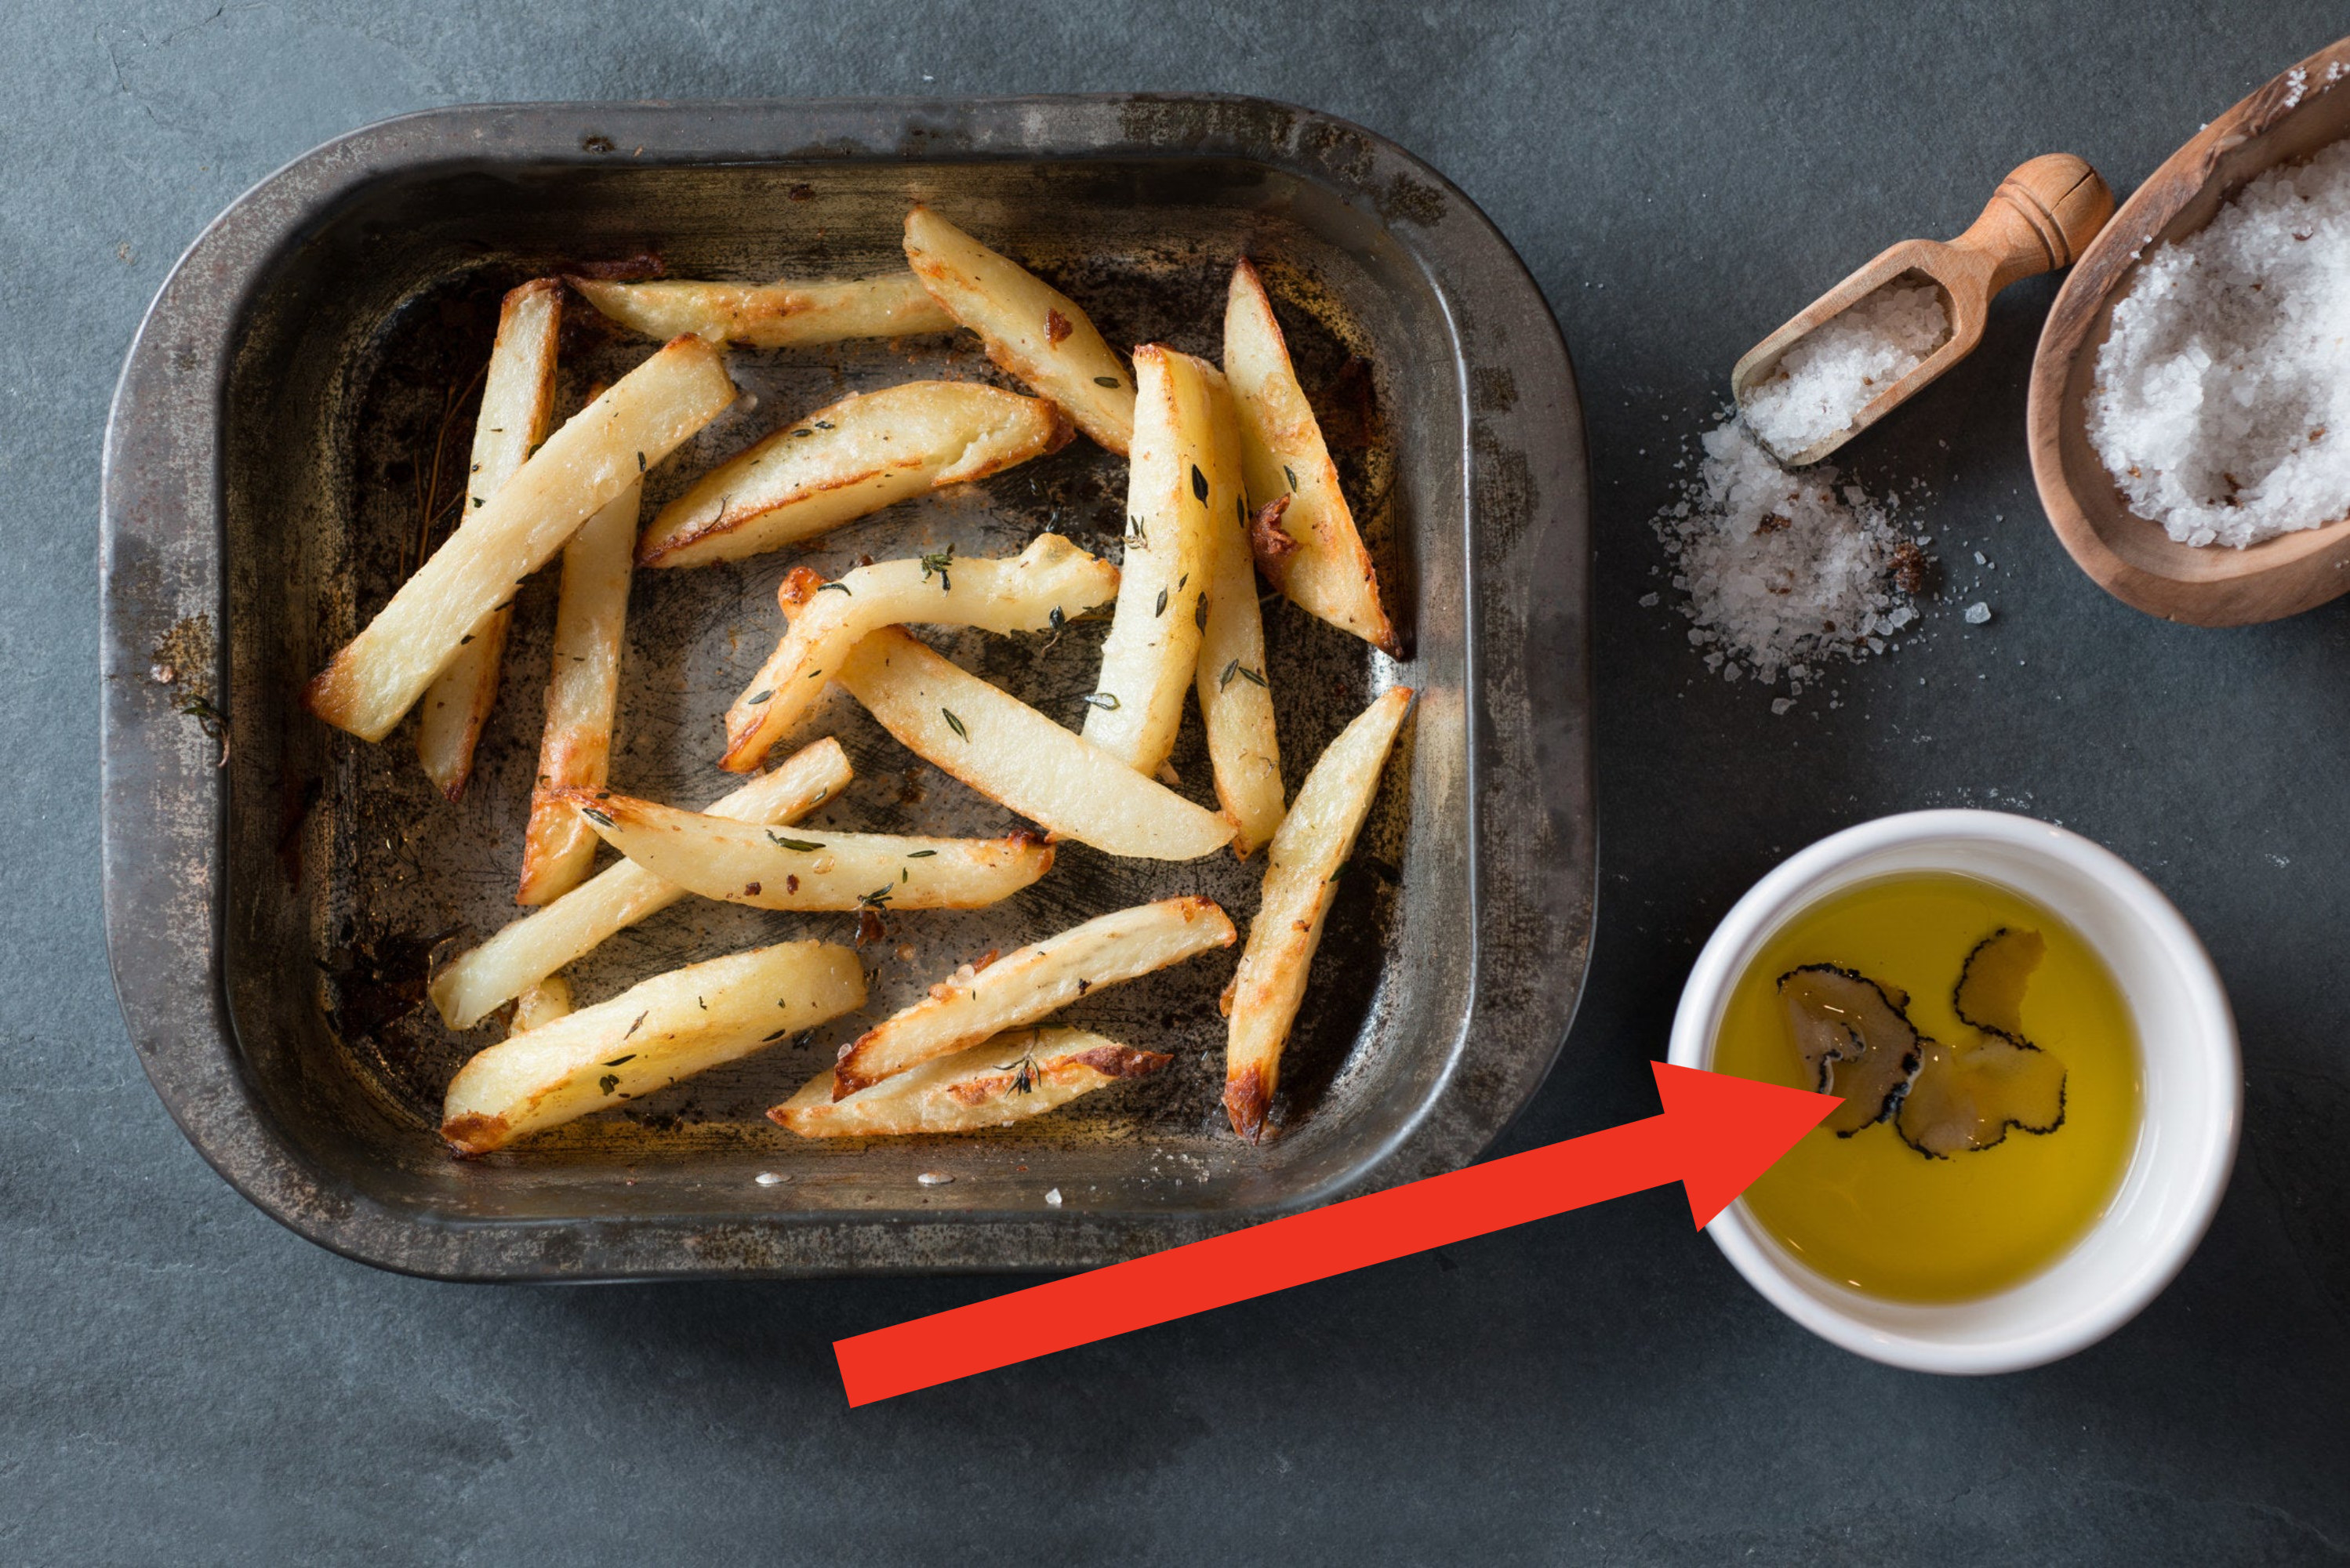 French fries with truffle oil on the side.